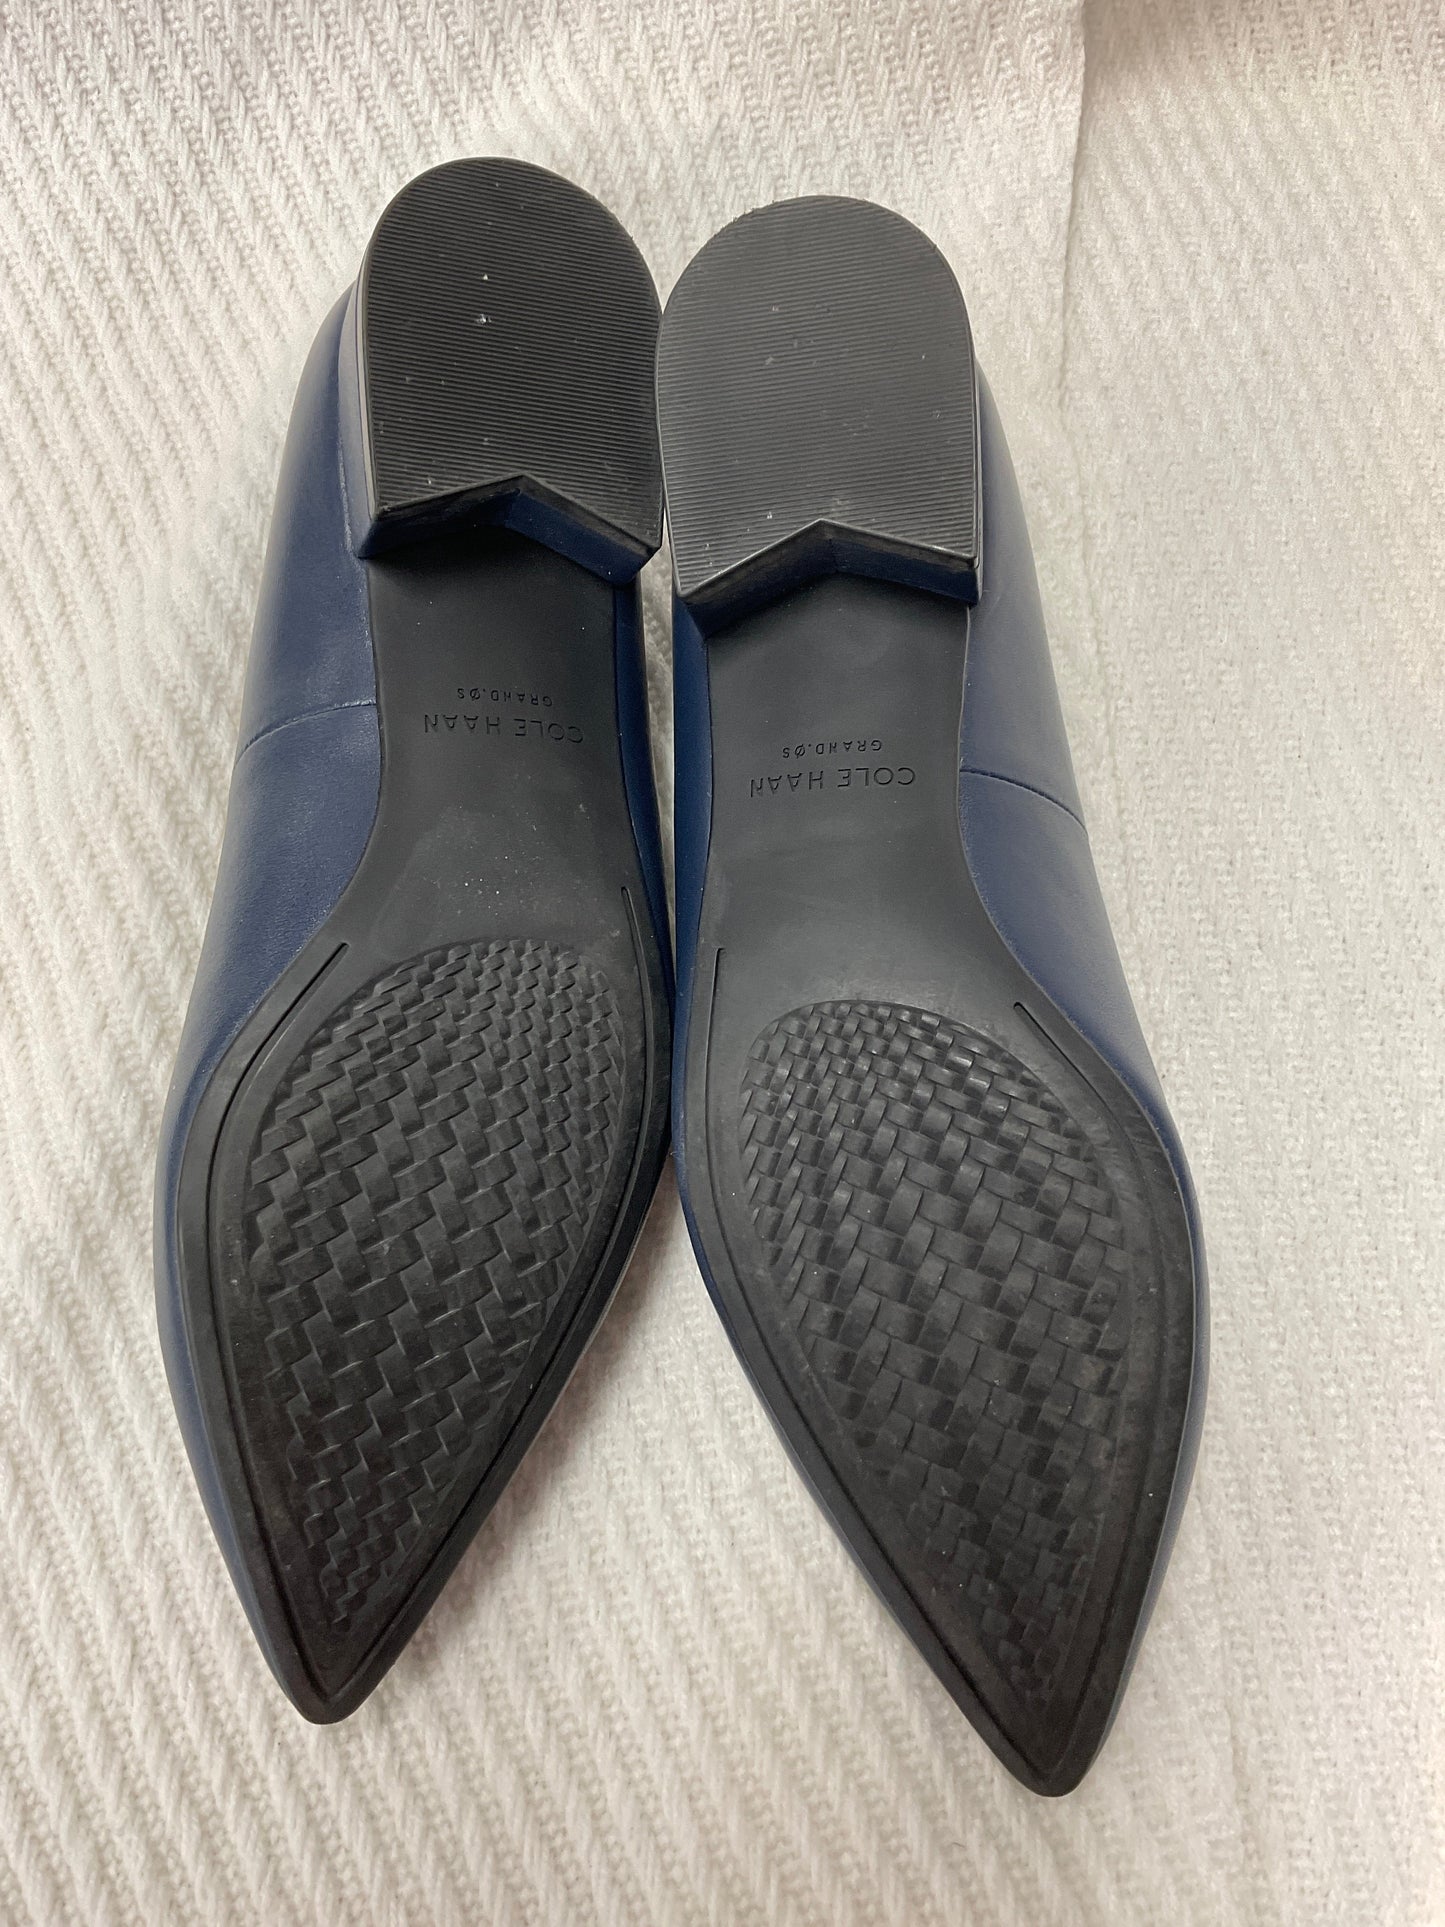 Shoes Flats Other By Cole-haan  Size: 9